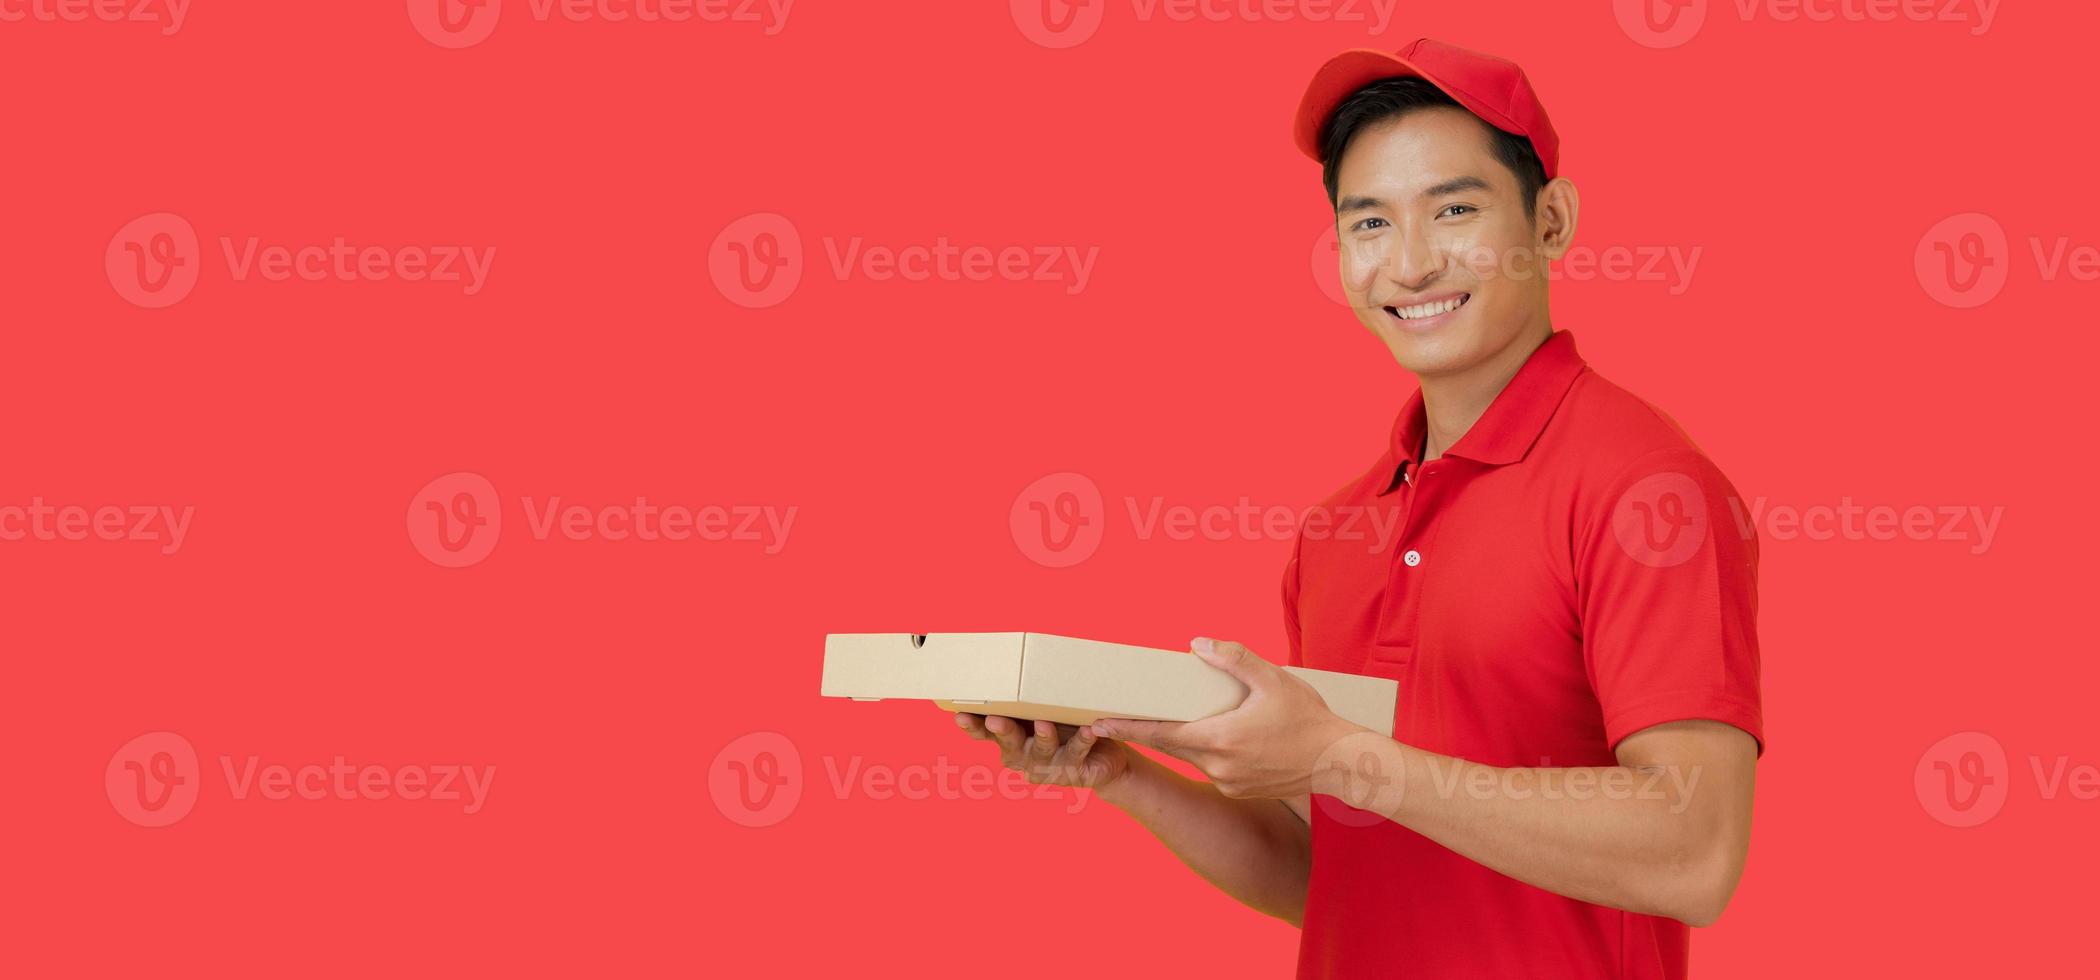 The smiling pizza delivery man stands on a red background holding the pizza box and wearing a red cap and a blank t-shirt uniform. photo